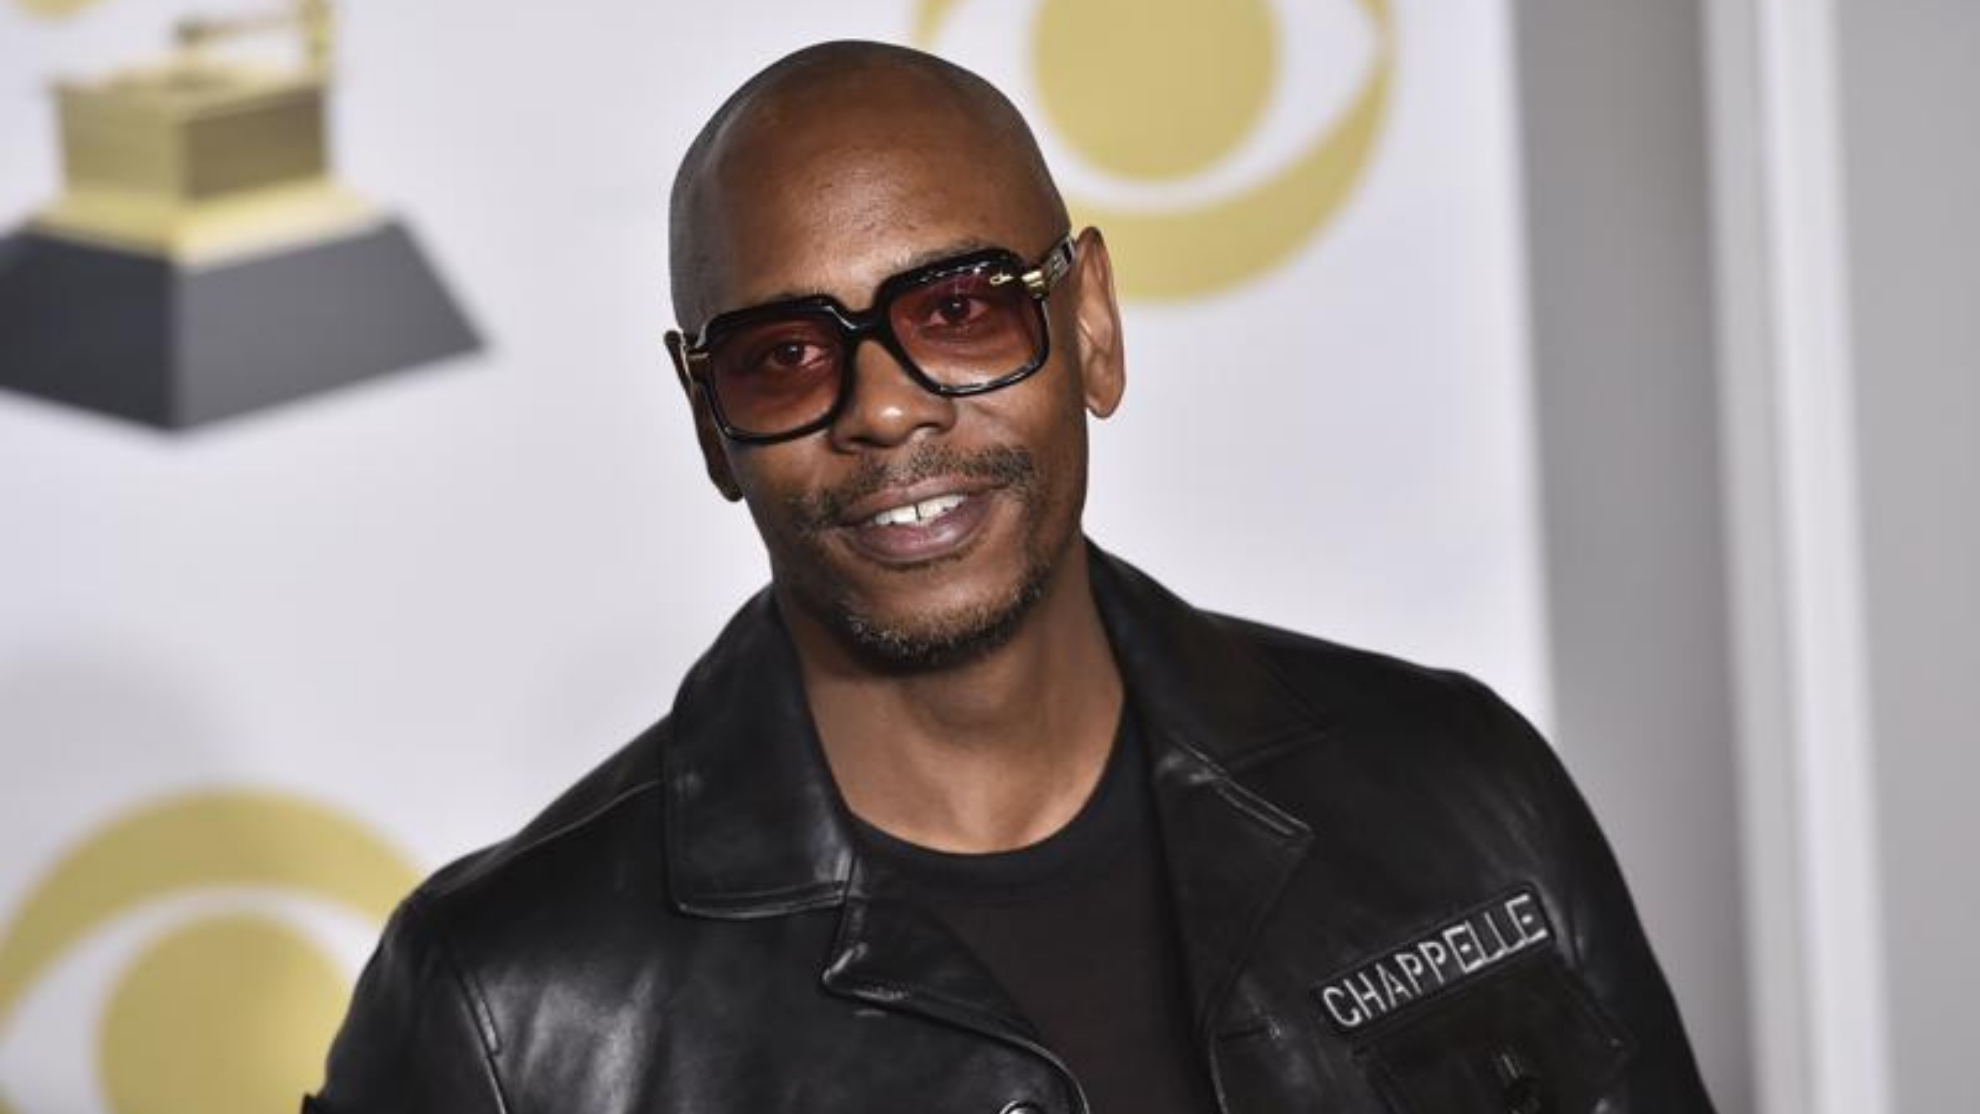 The Net Worth Of Dave Chappelle